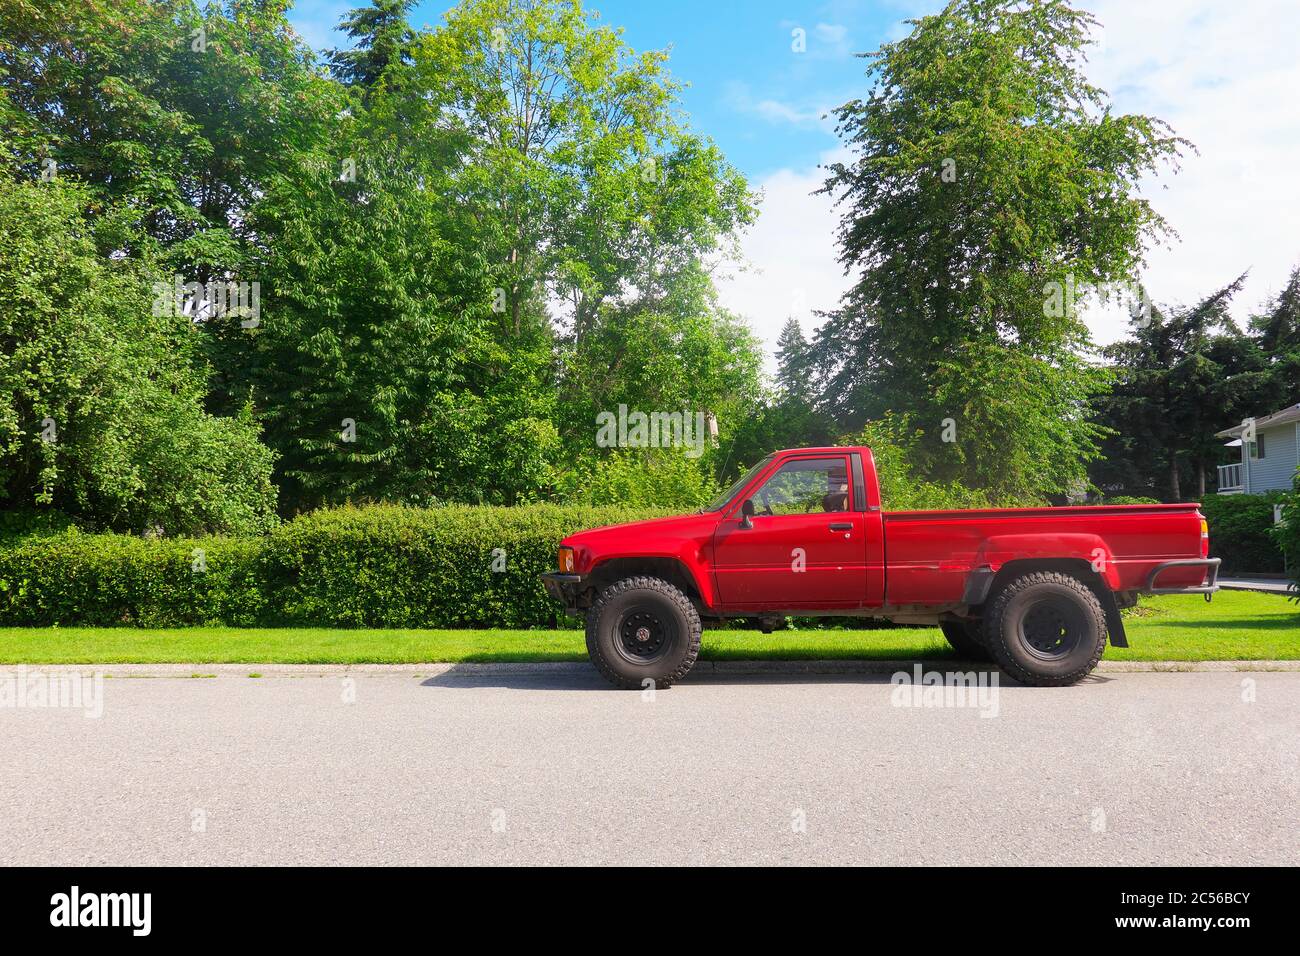 An older red Toyota pickup truck parked on a street with trees in the background. Stock Photo